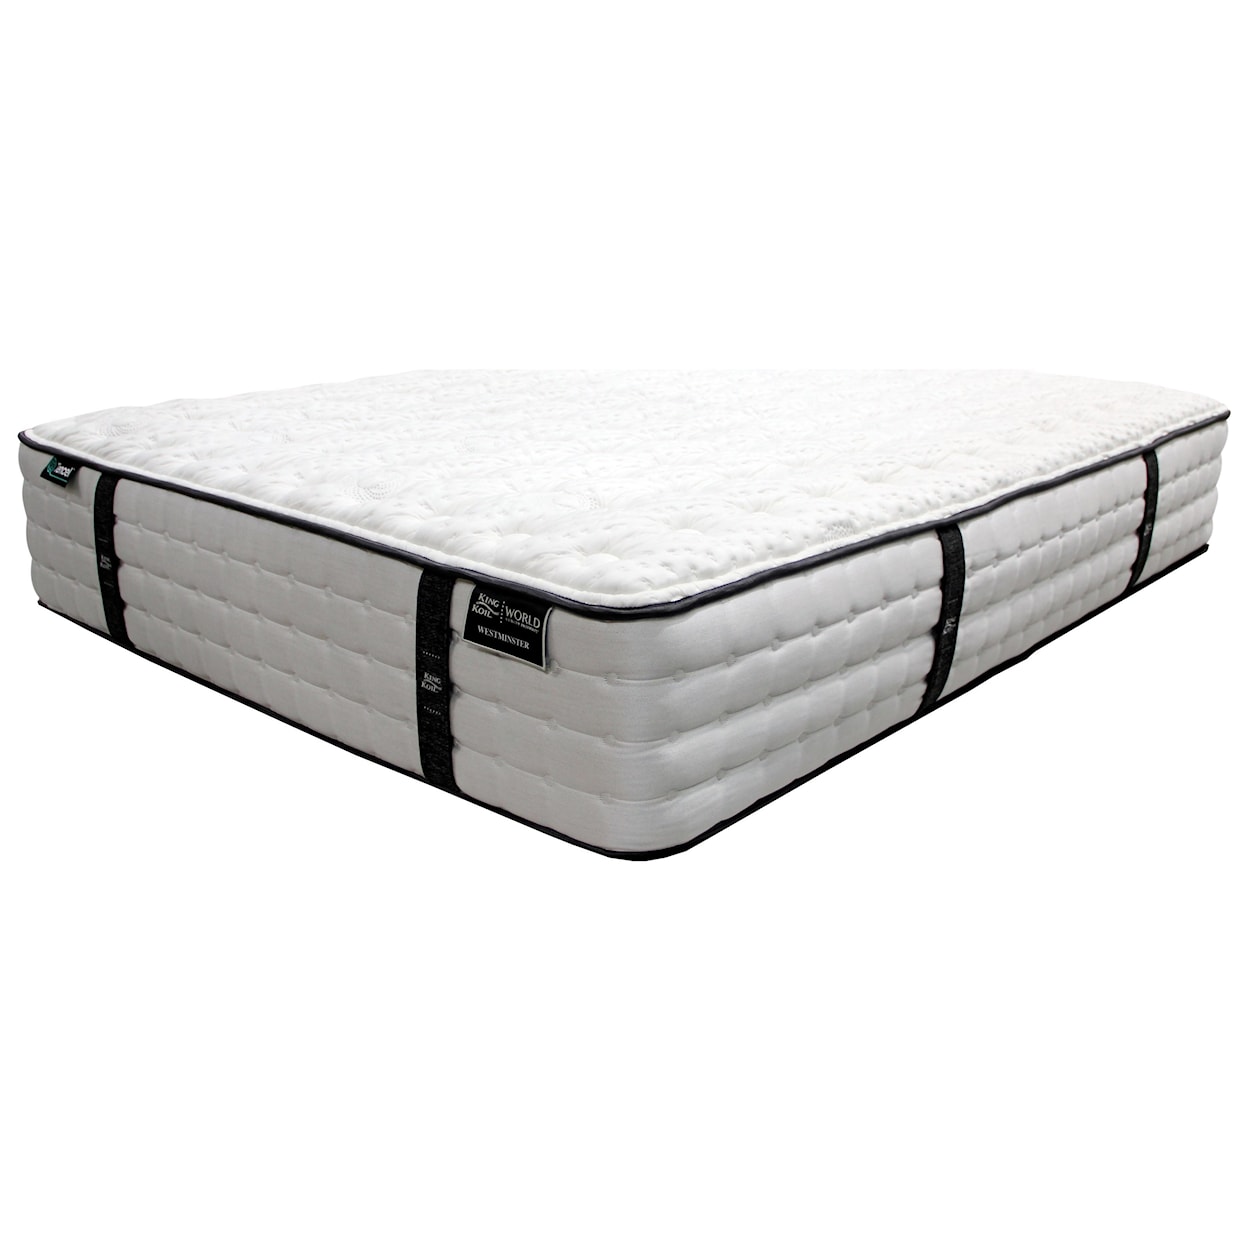 King Koil Westminster F Twin XL Pocketed Coil Mattress